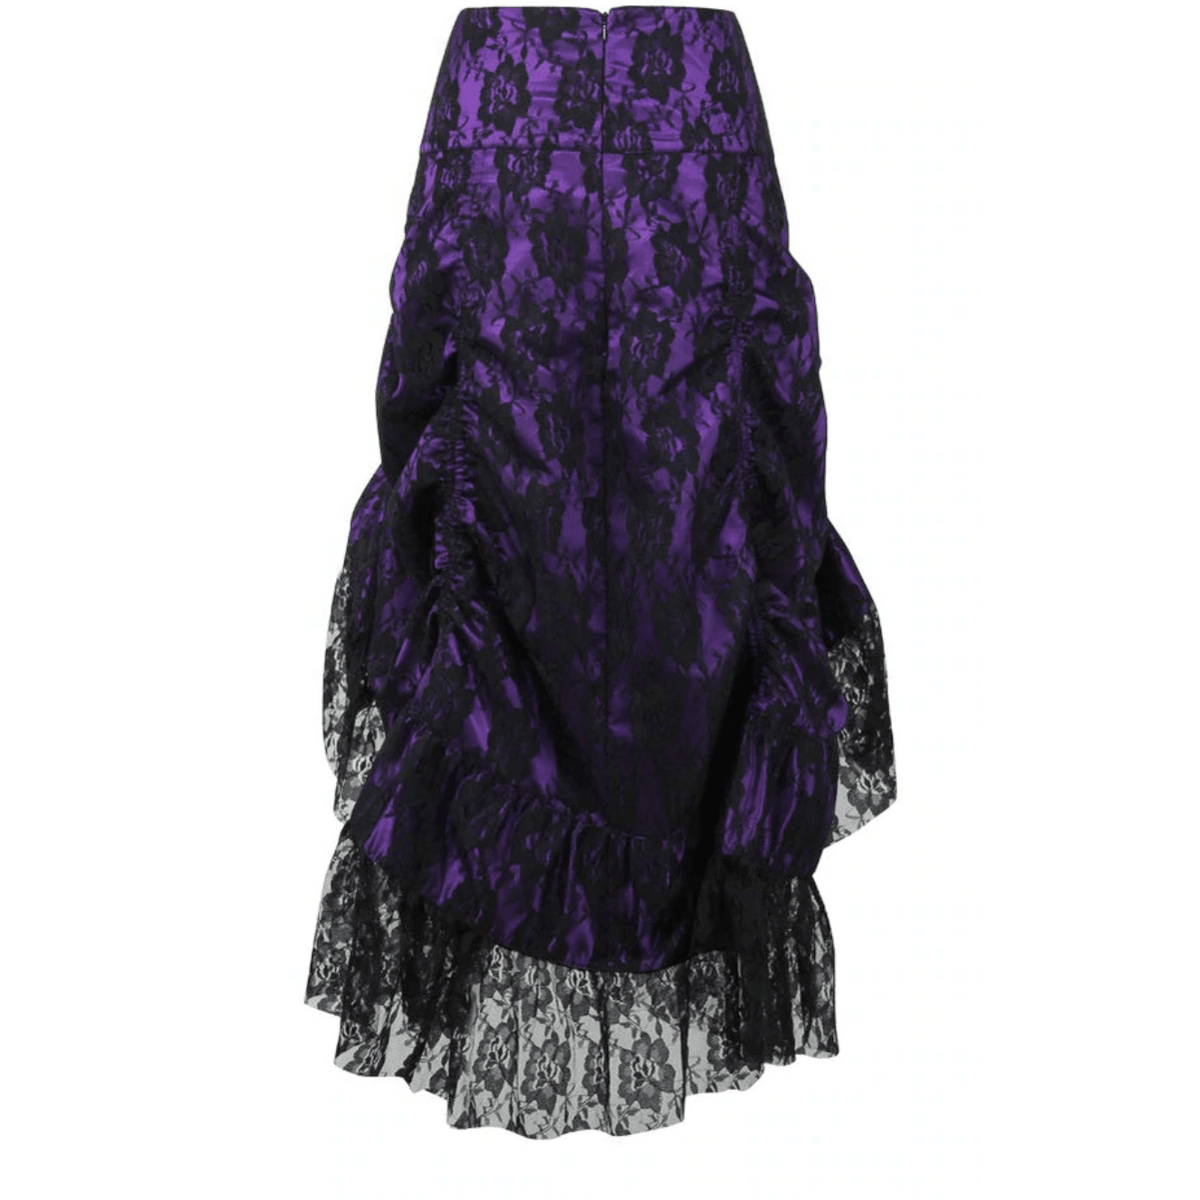 Black Lace Ruched Bustle Skirt